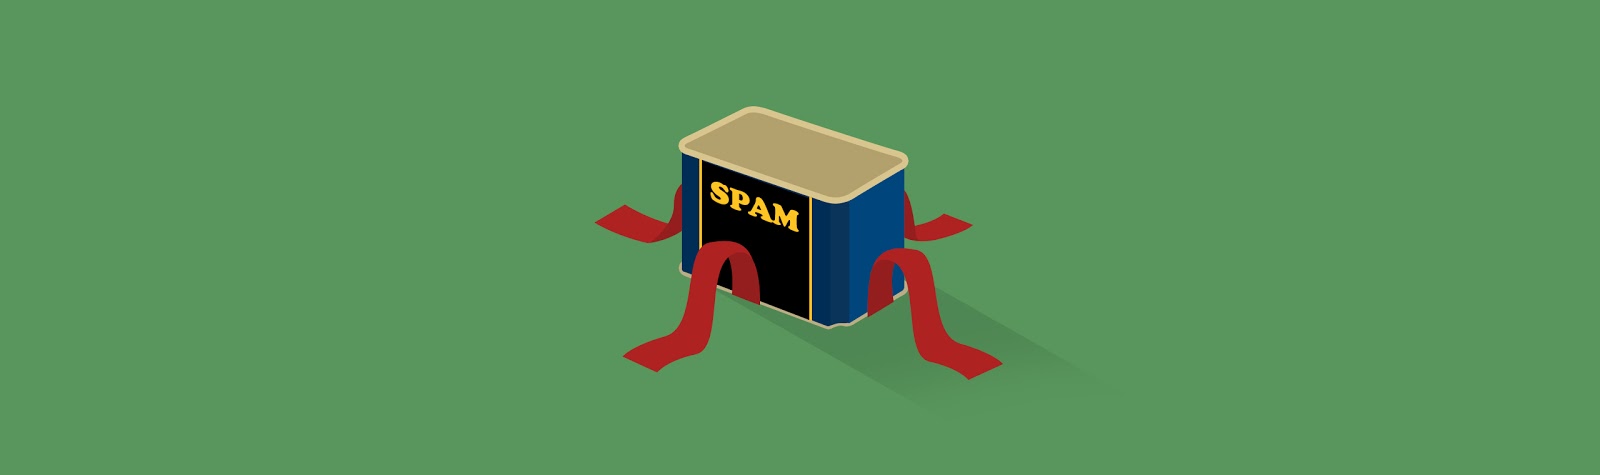 Graphic showing a spam box